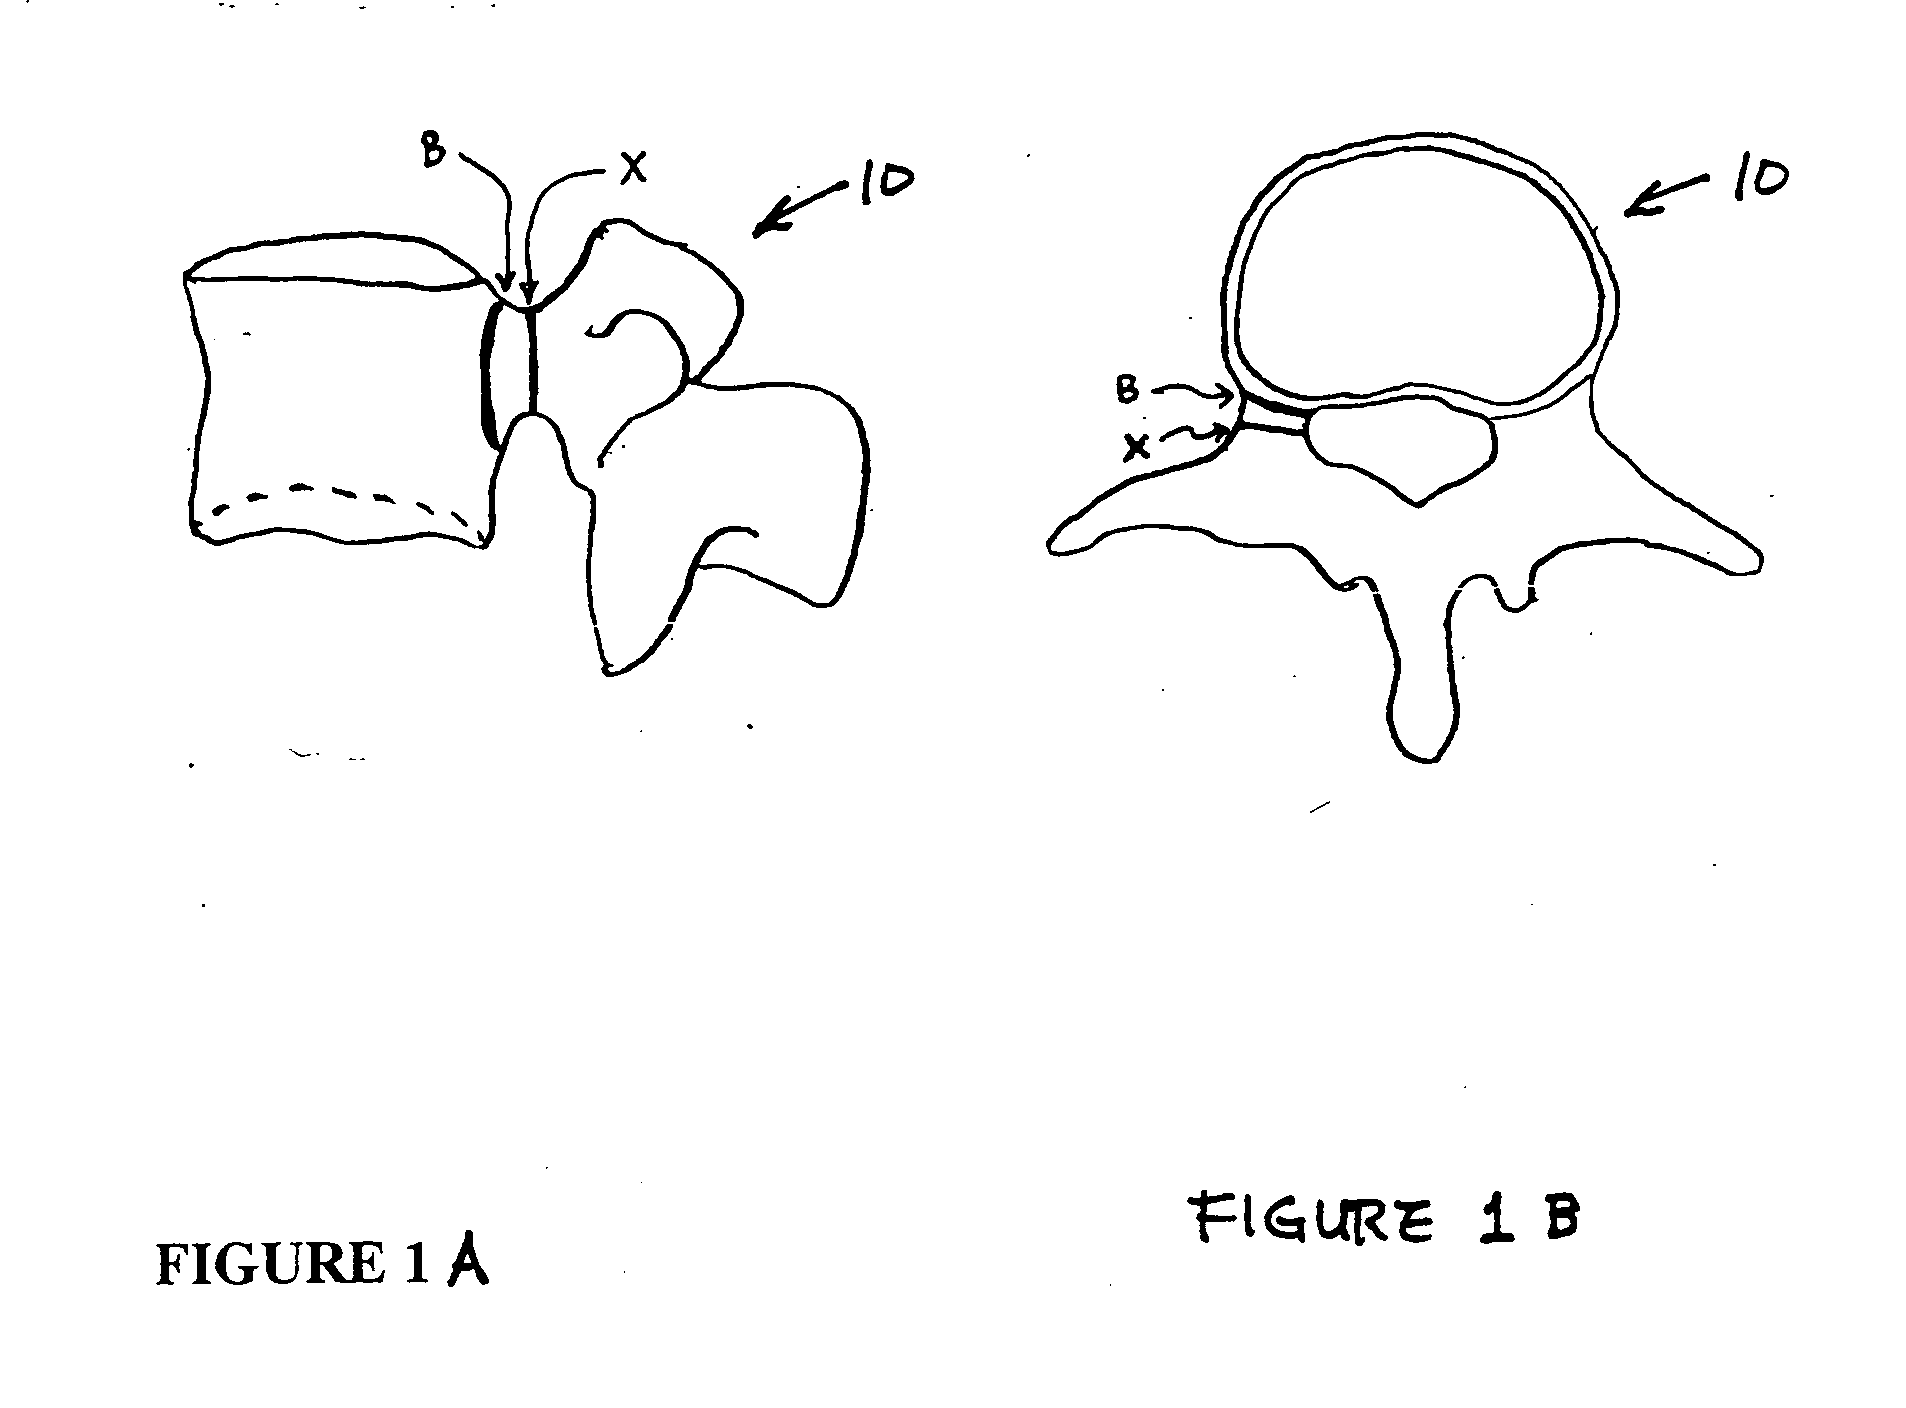 Methods for determining pedicle base circumference, pedicle isthmus and center of the pedicle isthmus for pedicle screw or instrument placement in spinal surgery